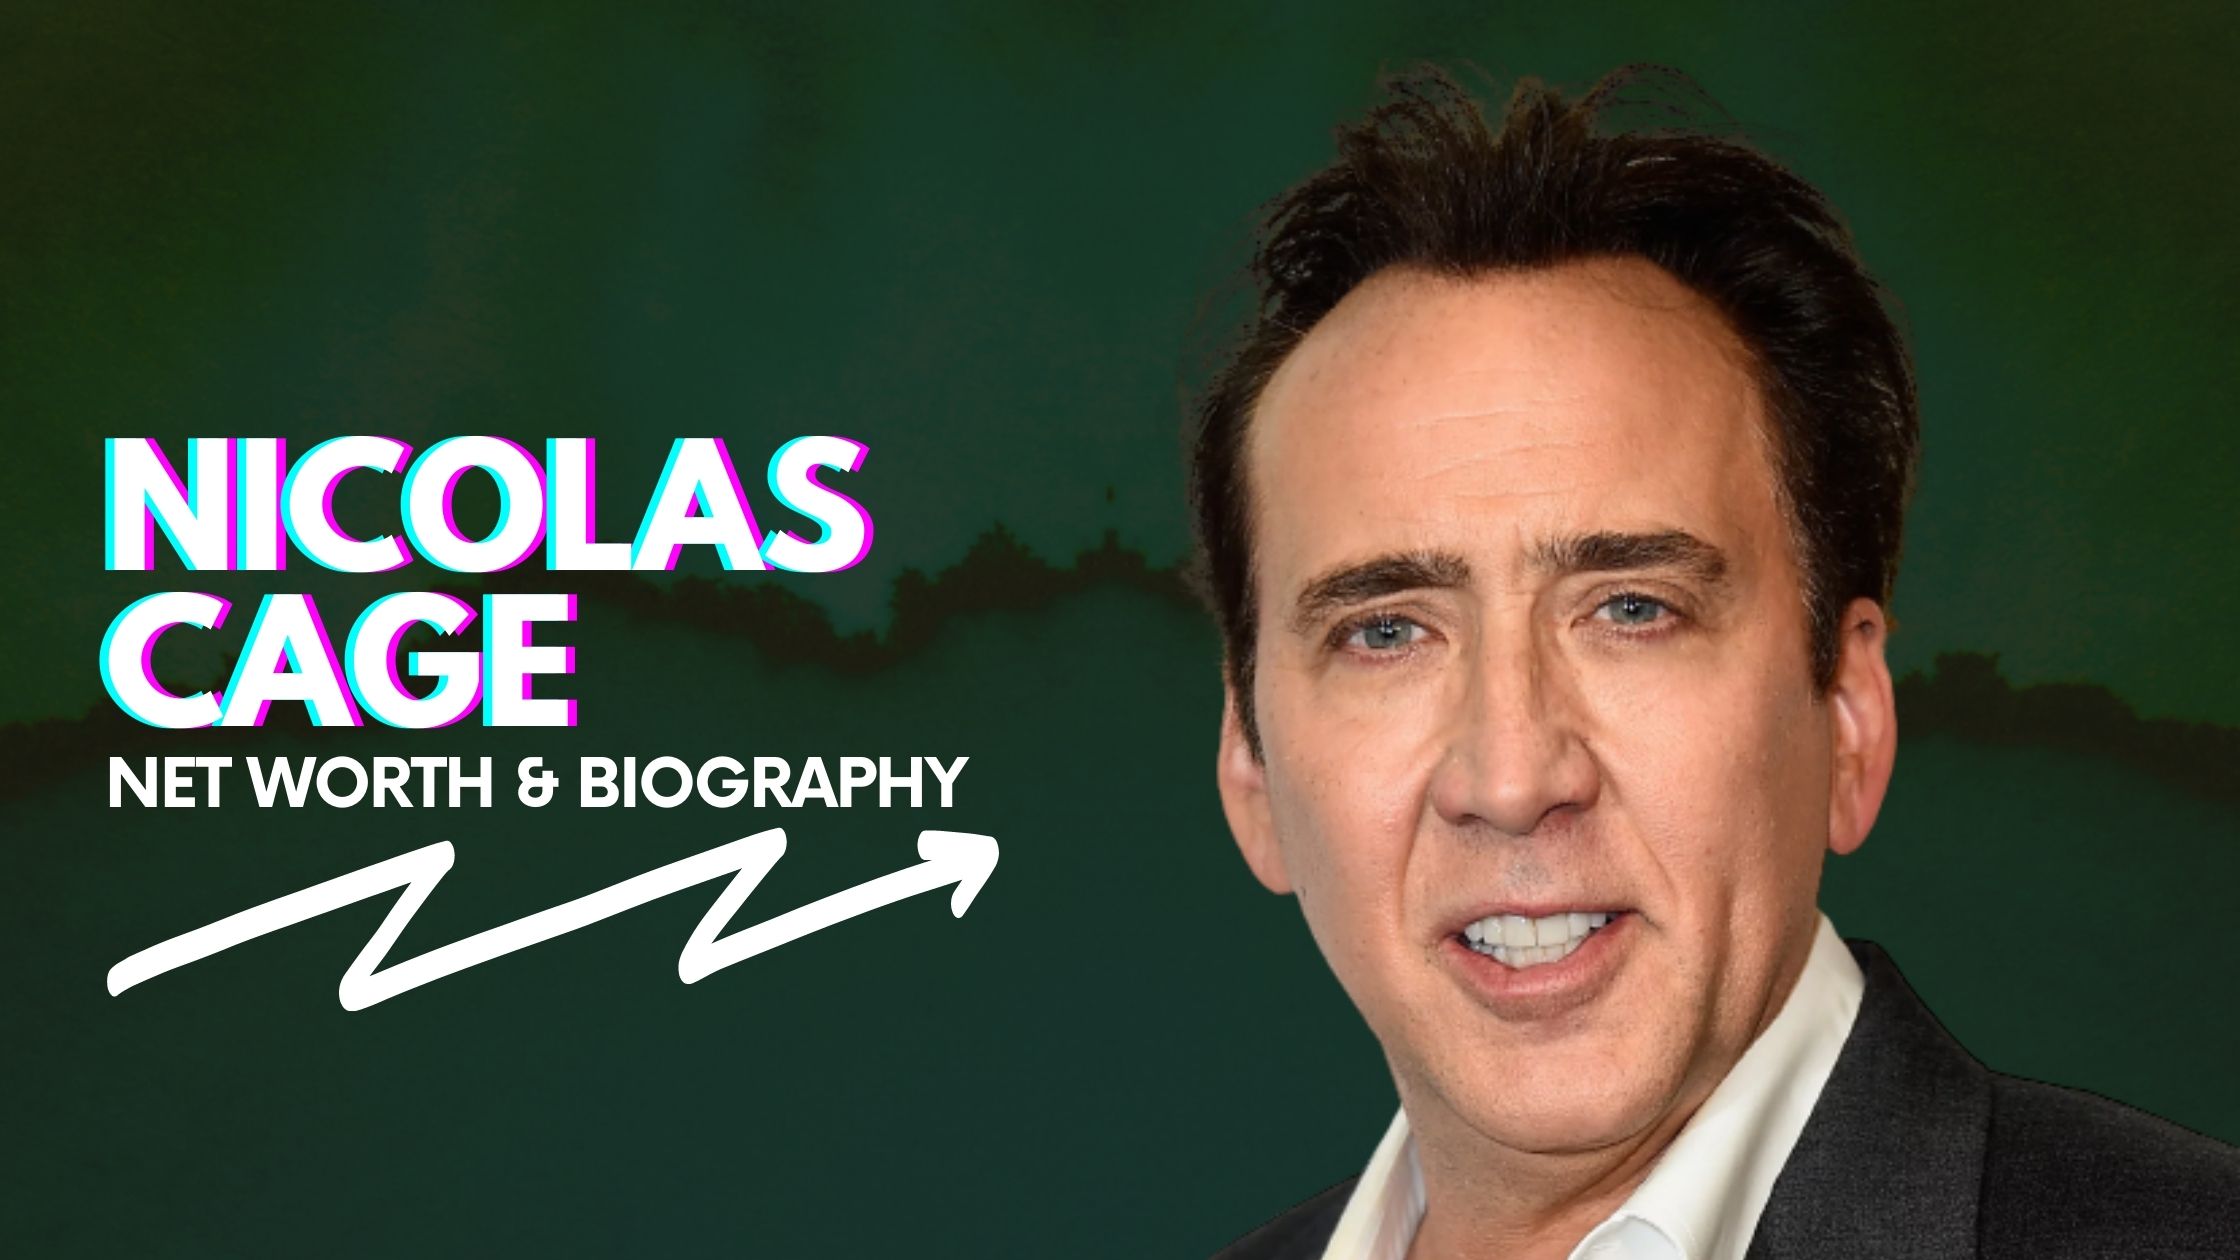 Nicolas Cage Net Worth And Biography